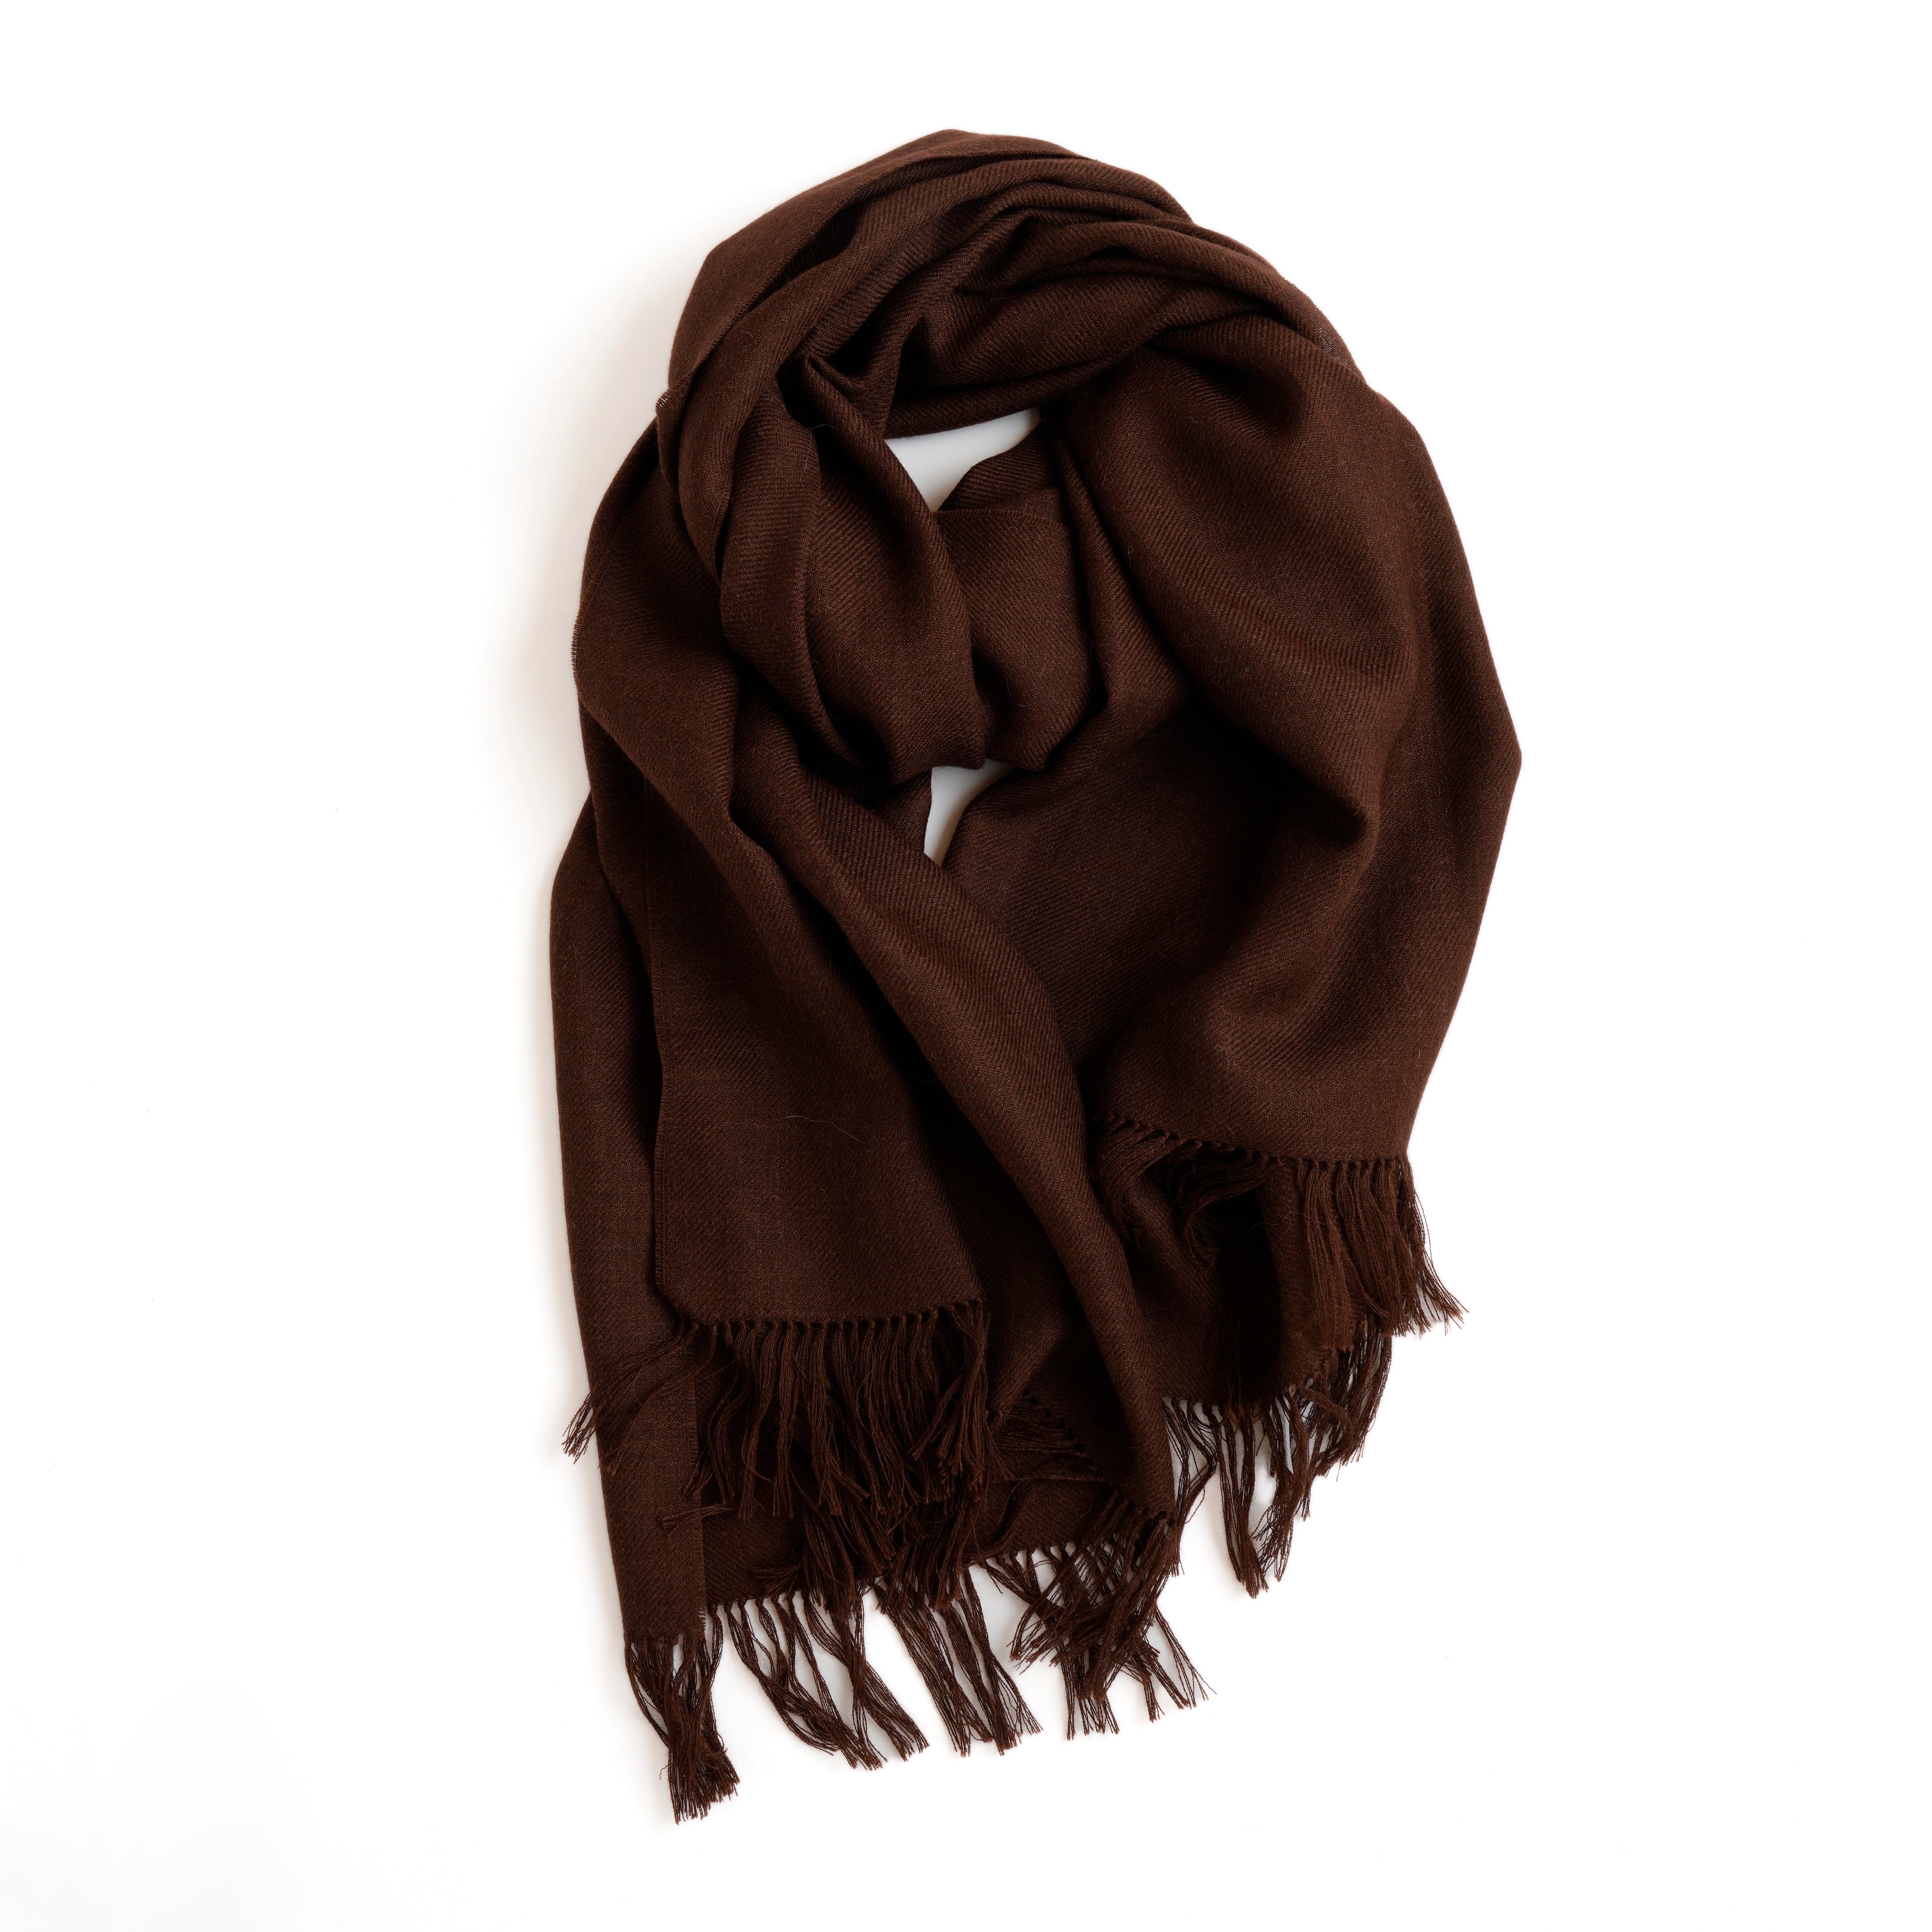 THE INOUE BROTHERS／Non Brushed Large Stole／Brown